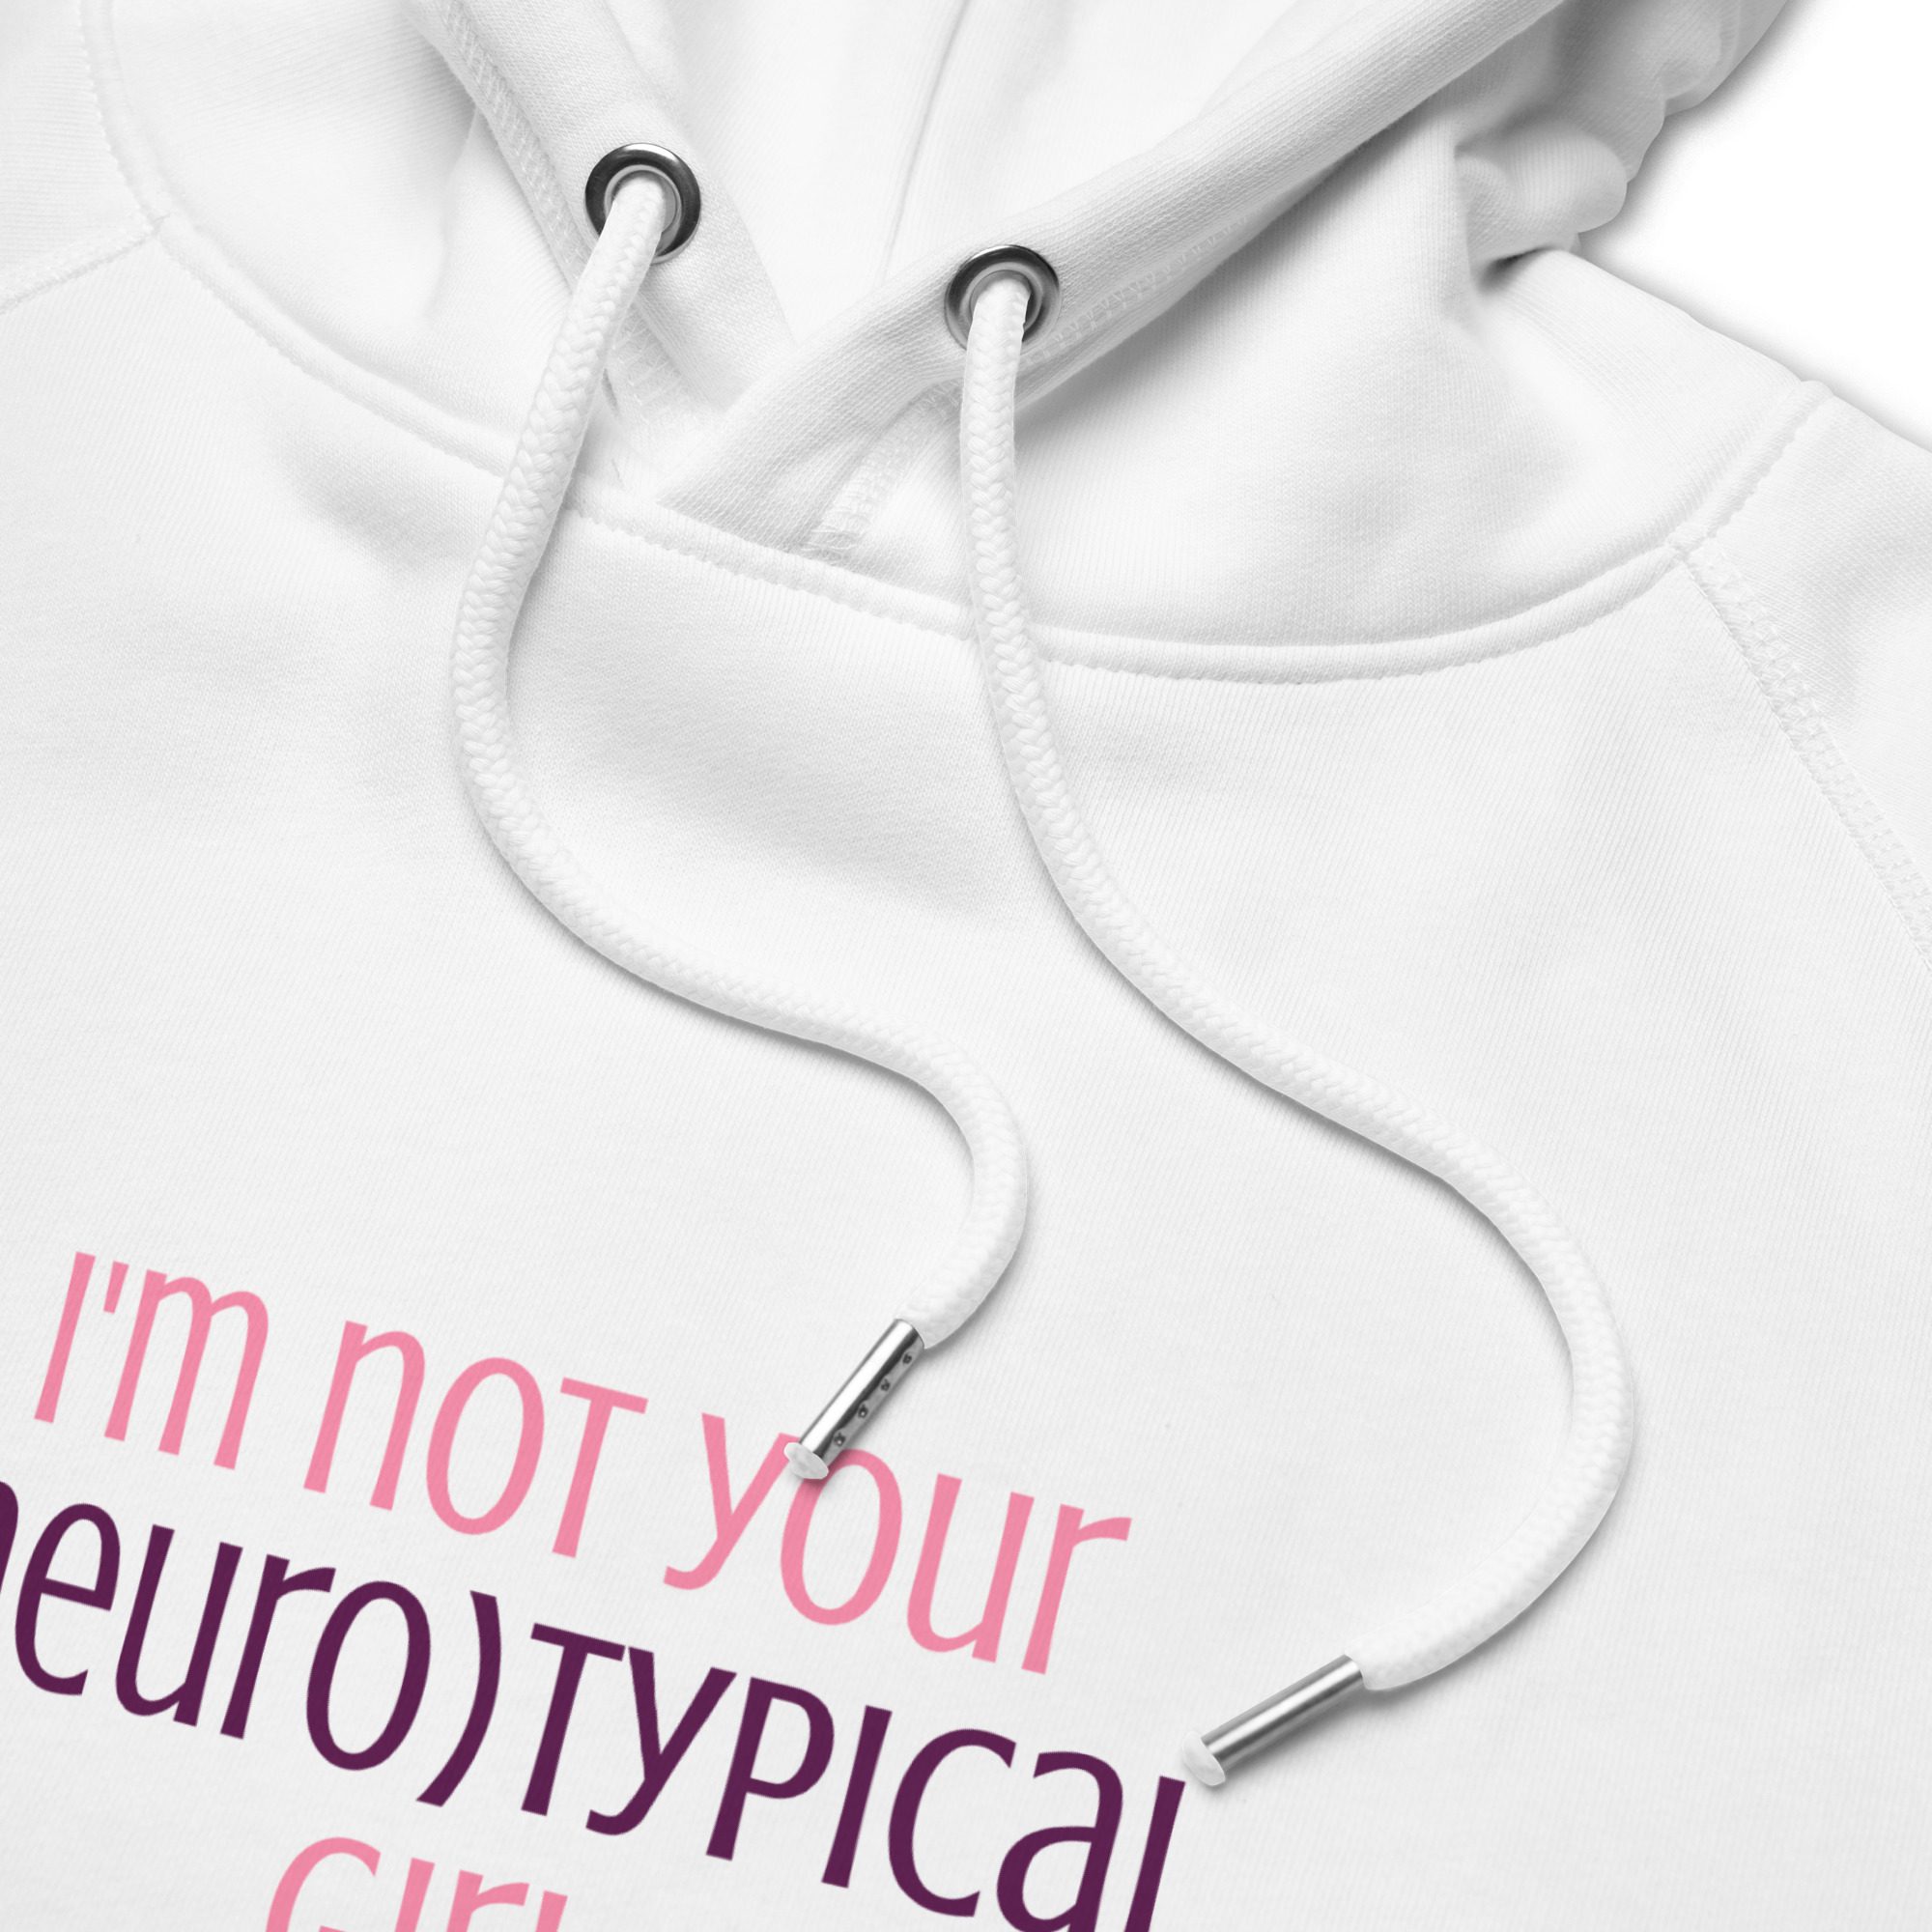 I’m Not Your Neurotypical Girl Organic Hoodie